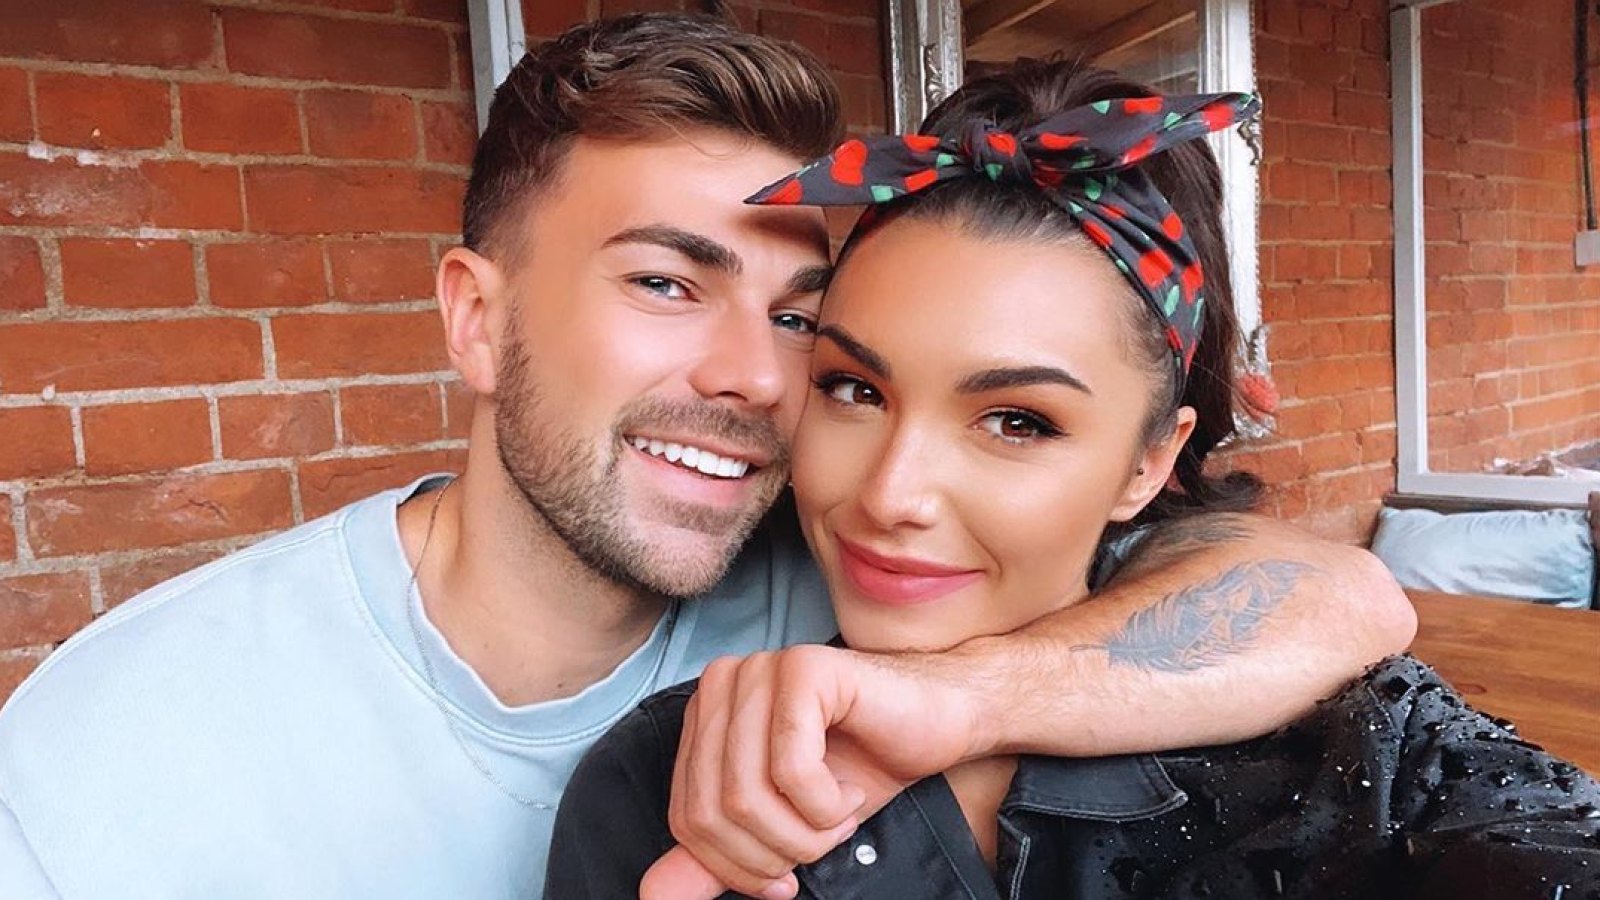 The Challenge's Kailah Casillas Is Engaged to Sam Bird 2